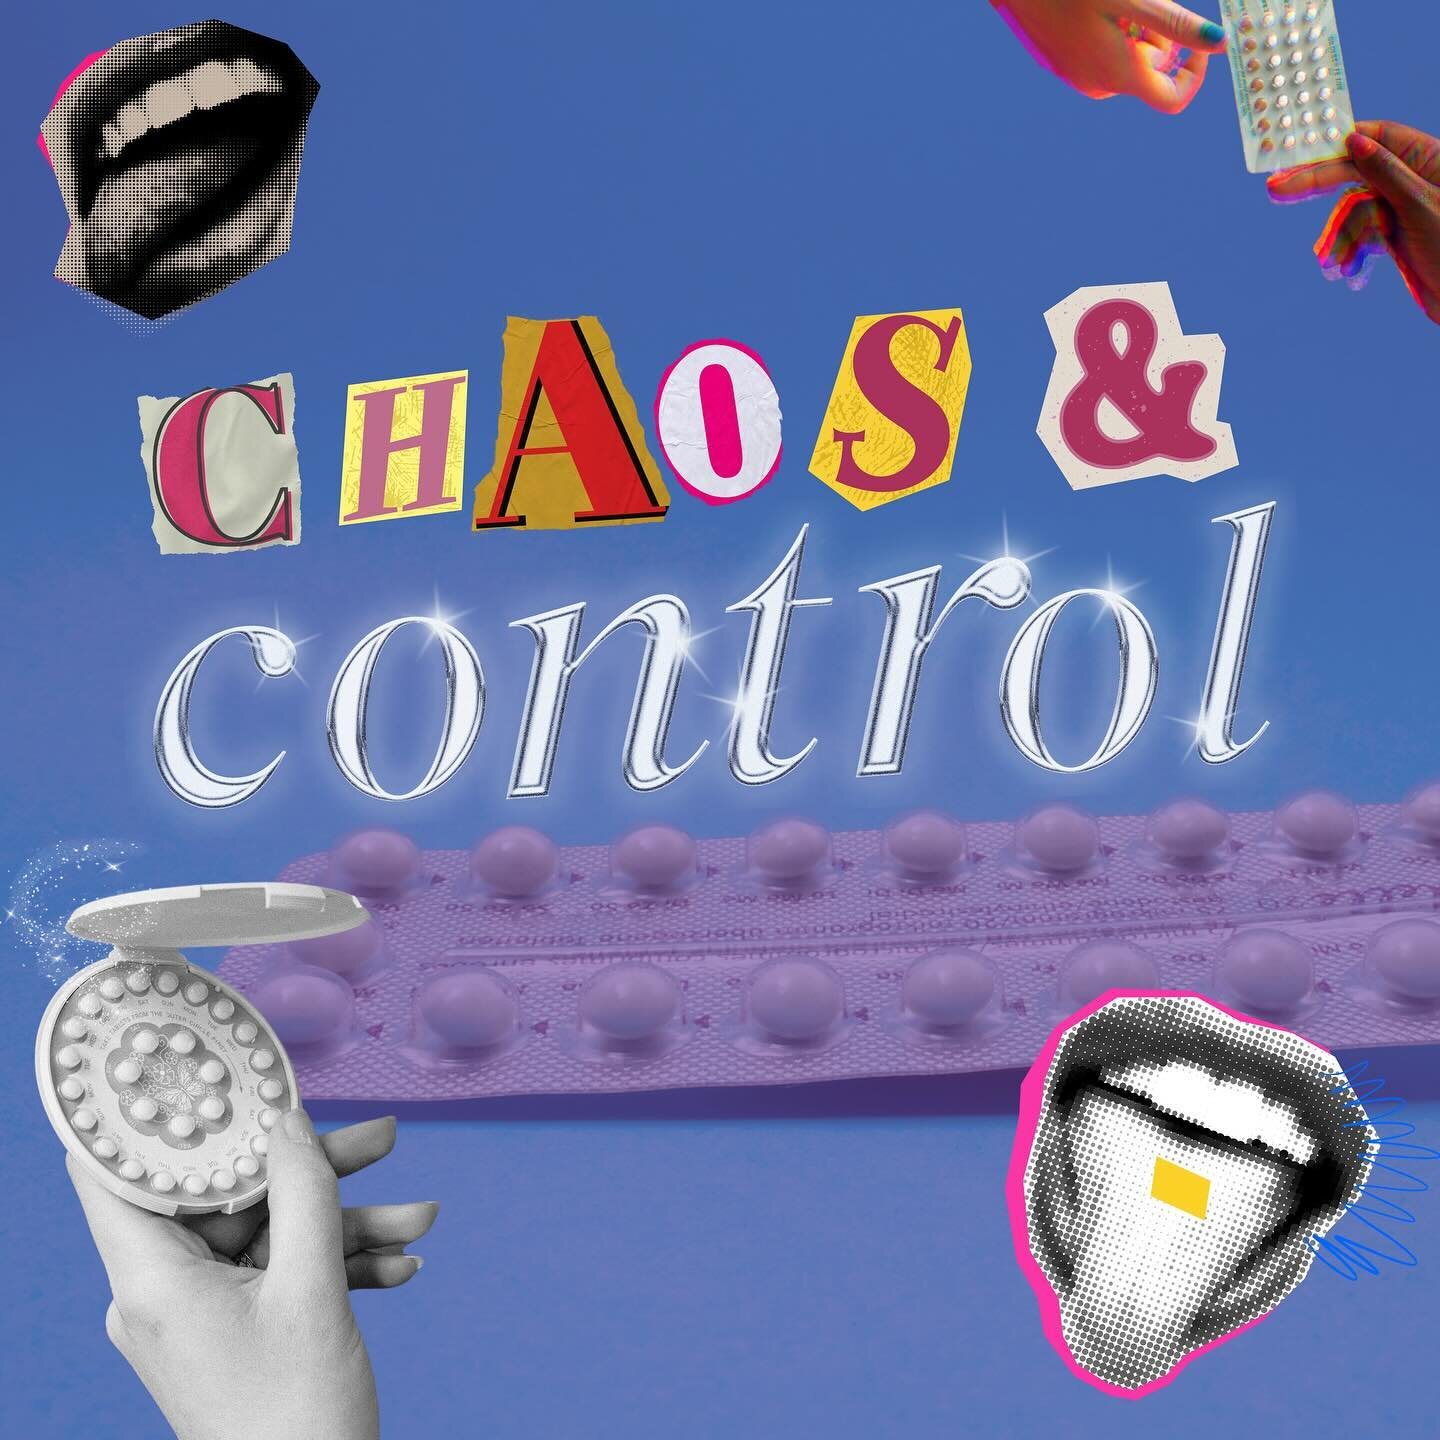 So excited to share a project I&rsquo;ve been working on since last summer! Introducing Chaos &amp; Control: the Story of Birth Control in America 🎧✨

Follow @chaosandcontrolpod to stay updated 🌝

Chaos and Control&nbsp;is an original documentary-s